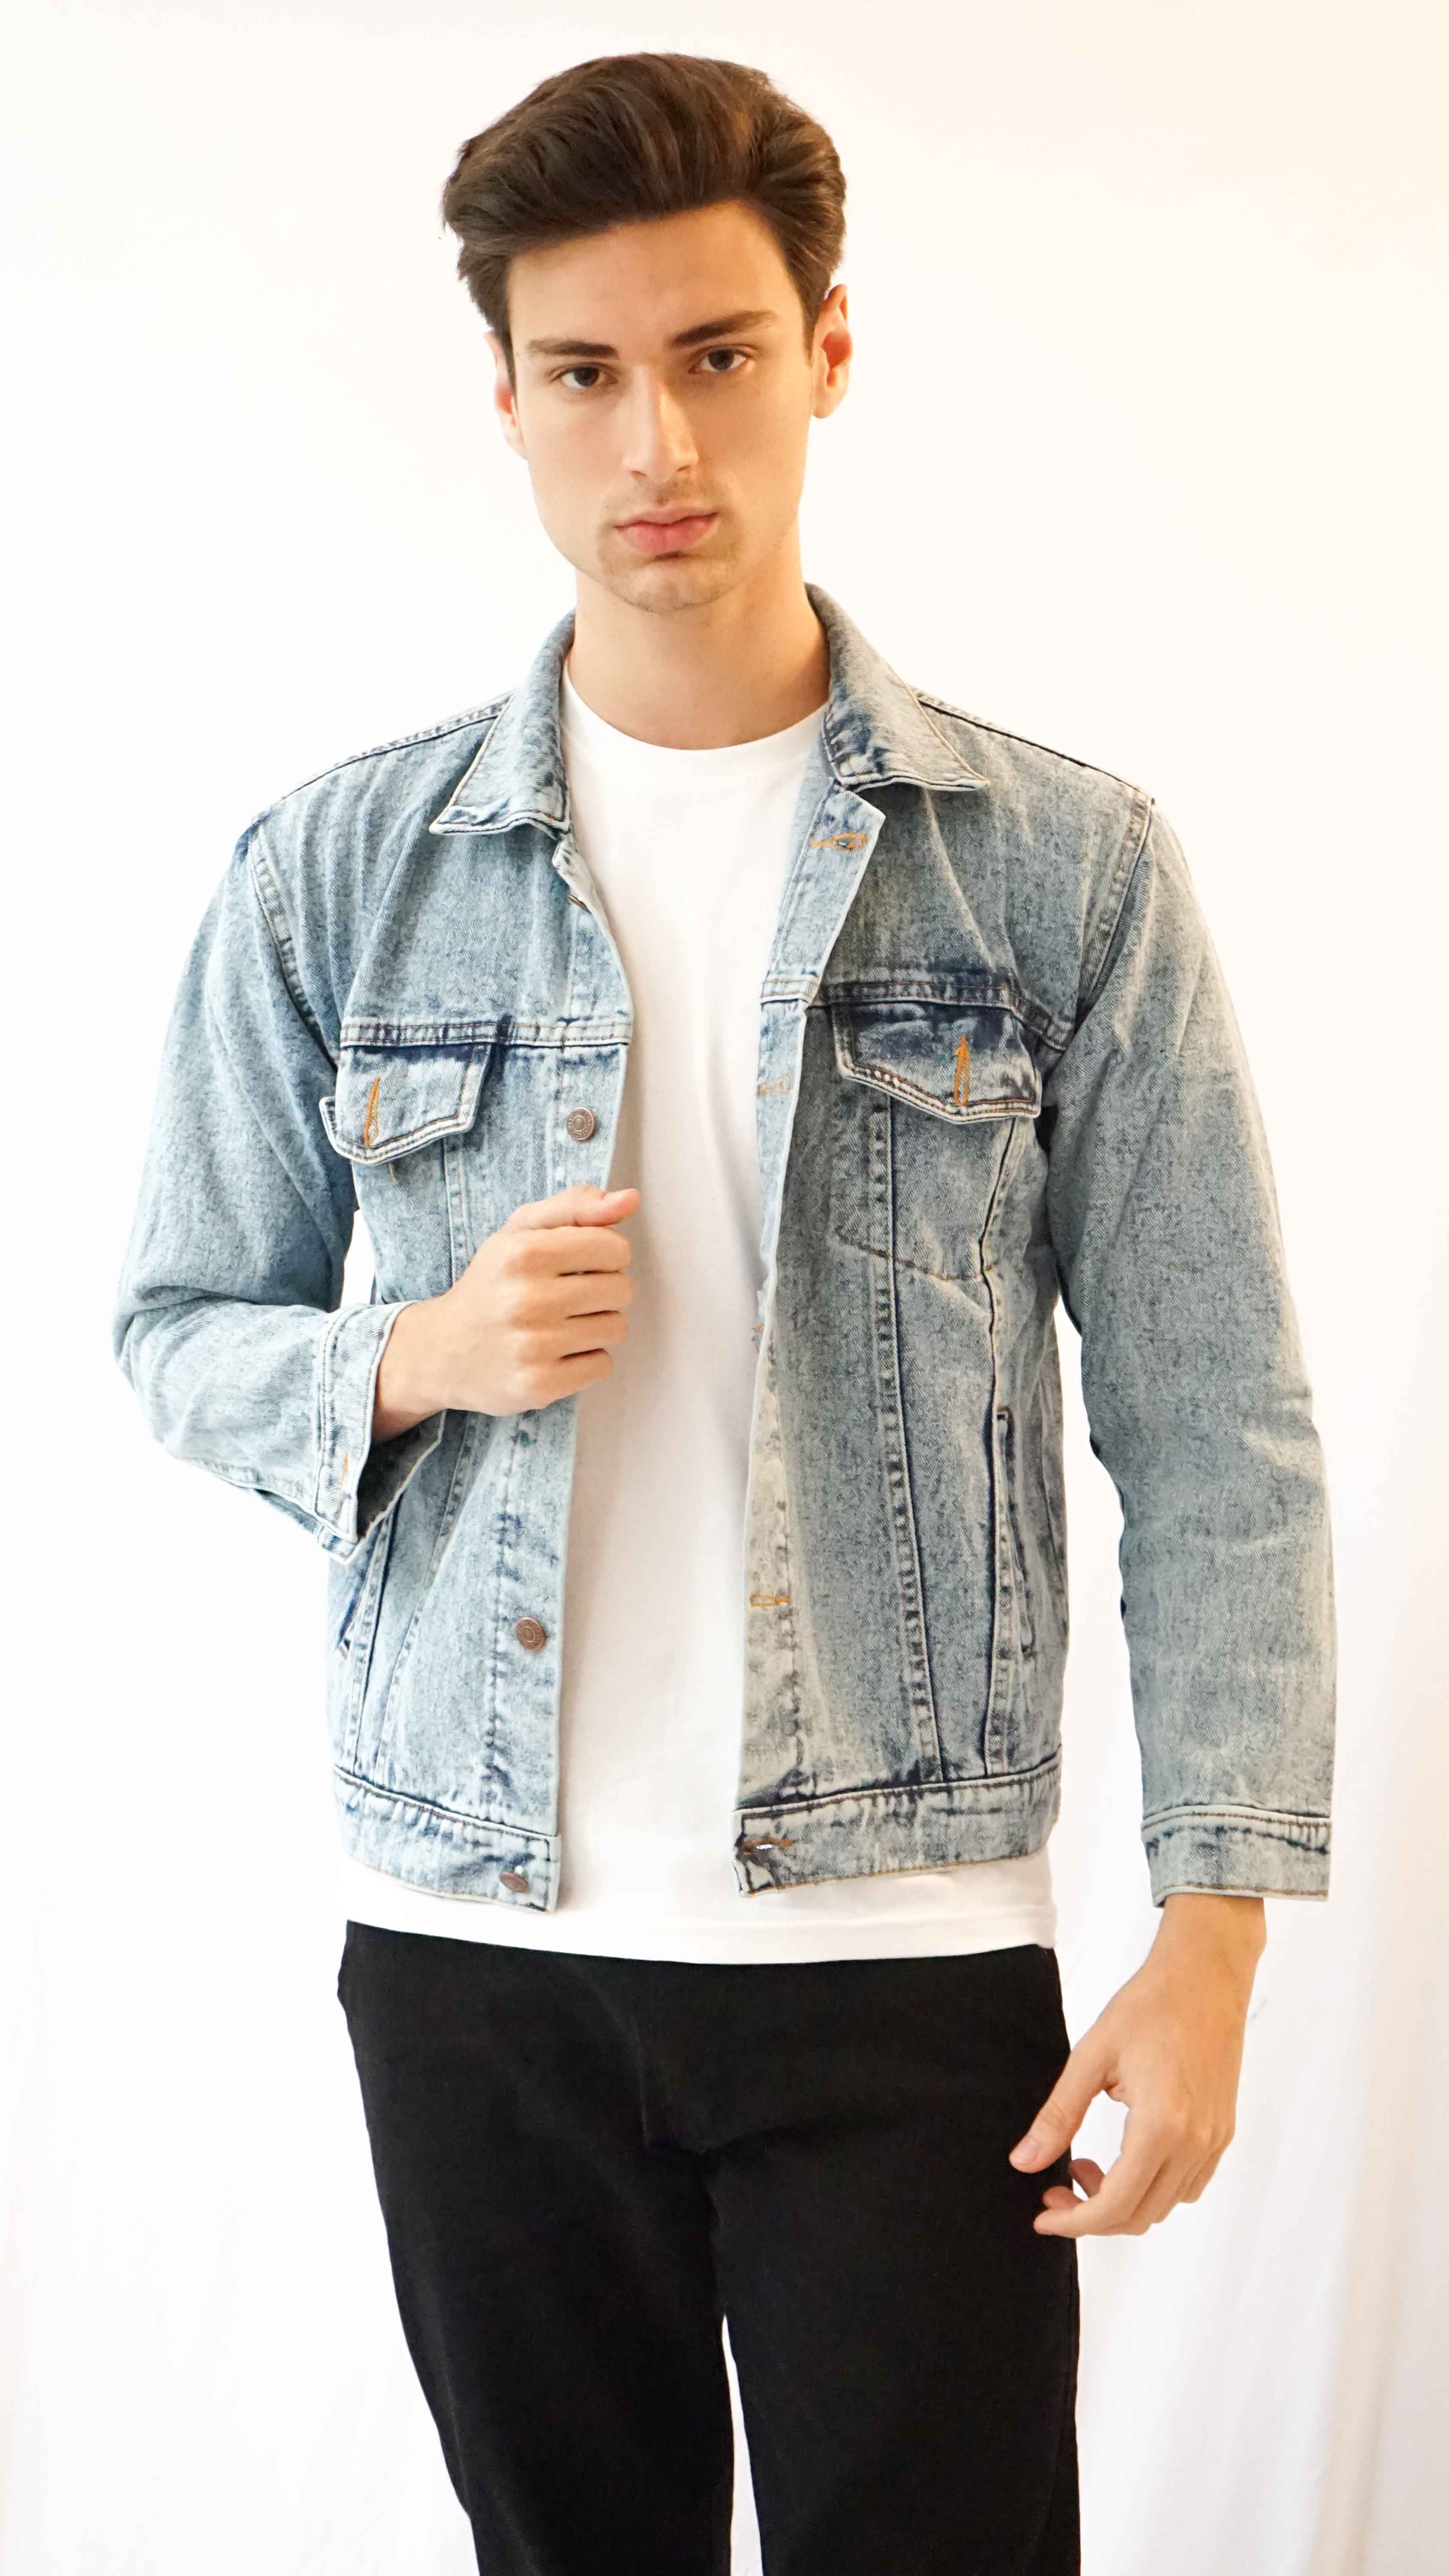 JEANS JACKET BLUE WASHED RIPPED